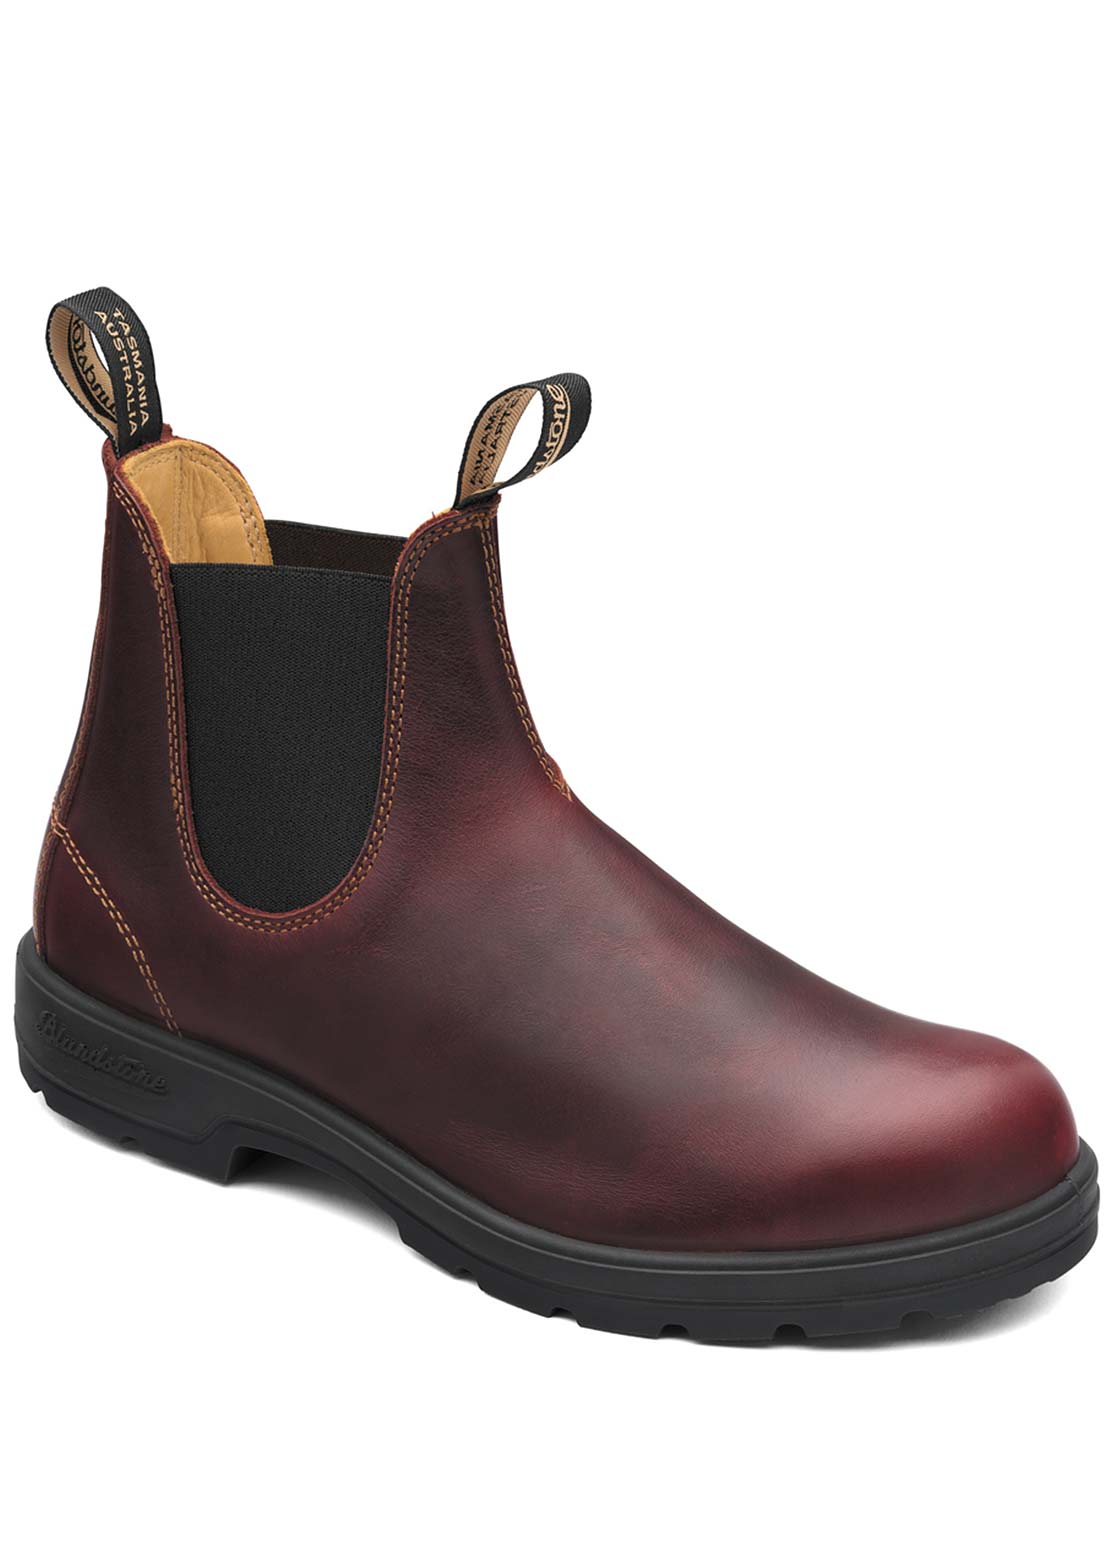 Blundstone 1440 Classic Boots Redwood